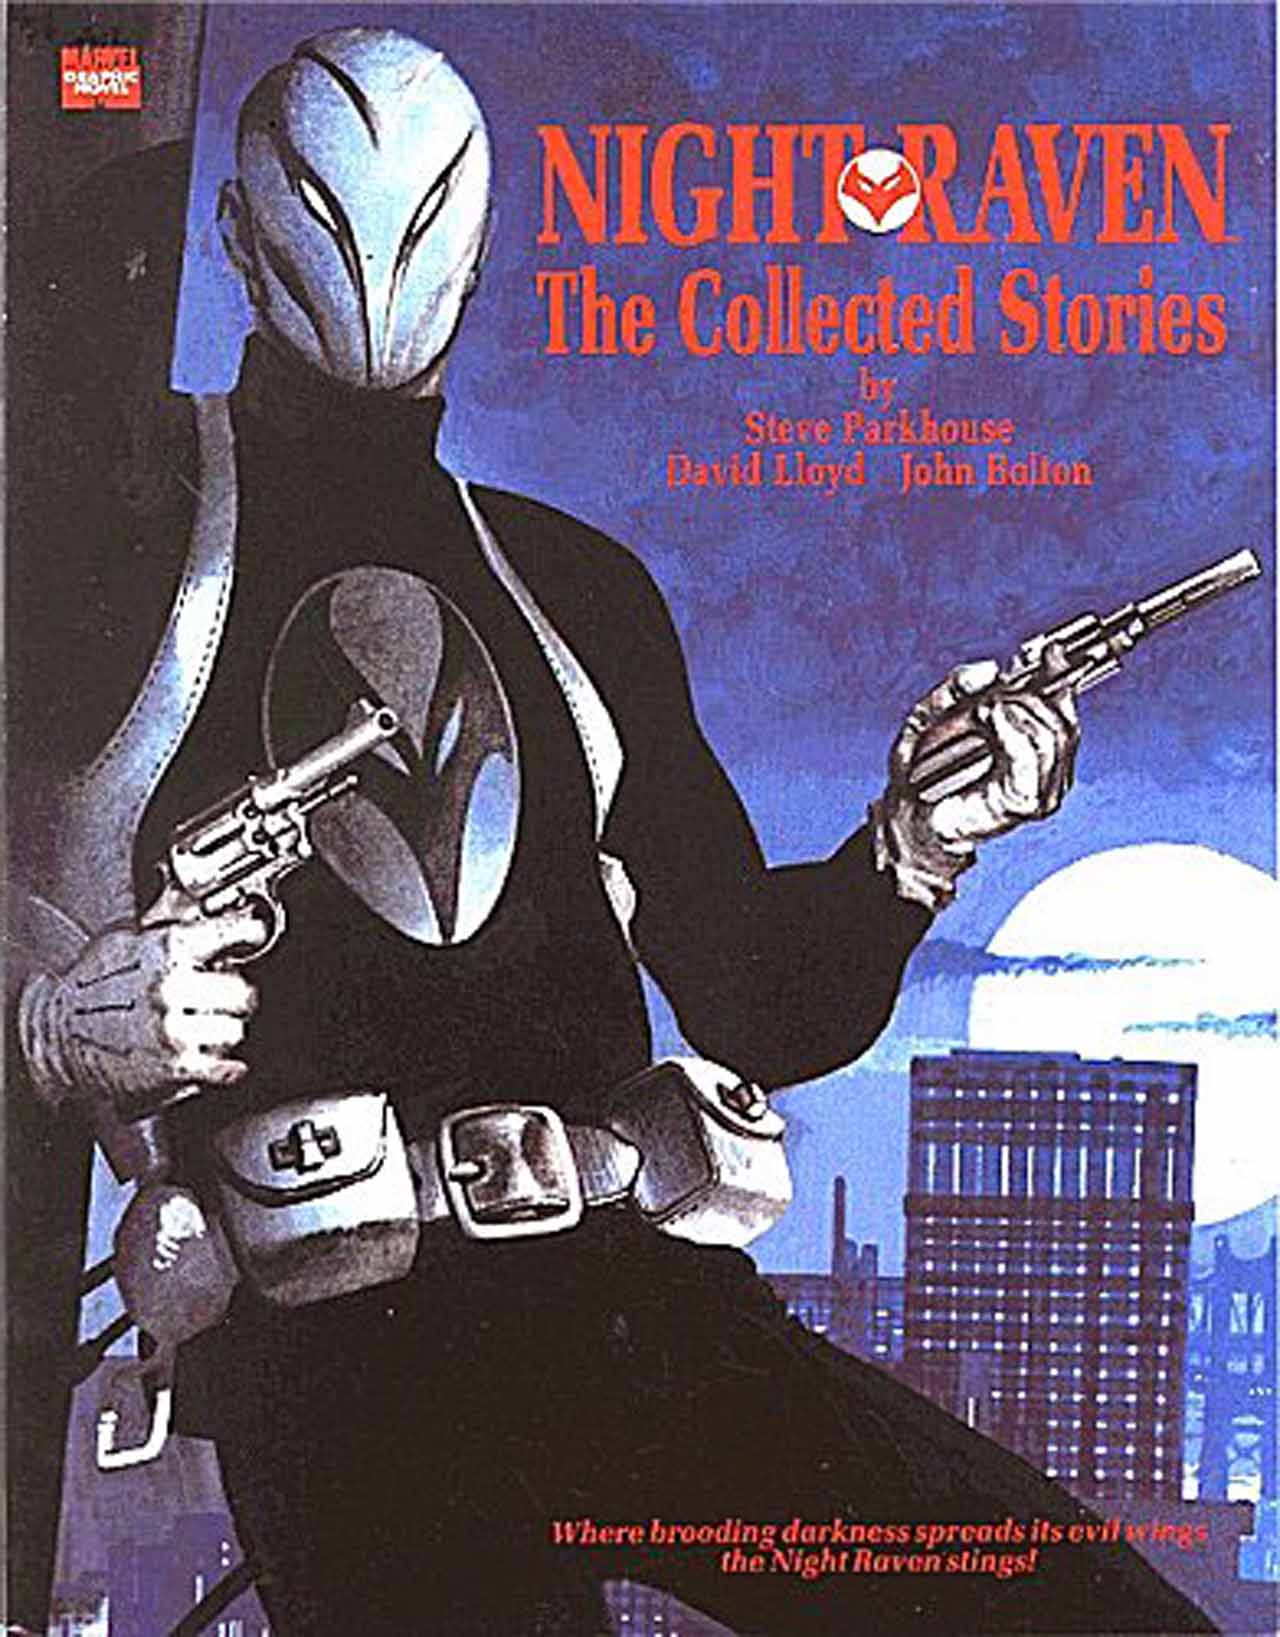 Read online Marvel Graphic Novel comic -  Issue #5 Night Raven - Collected Stories - 1